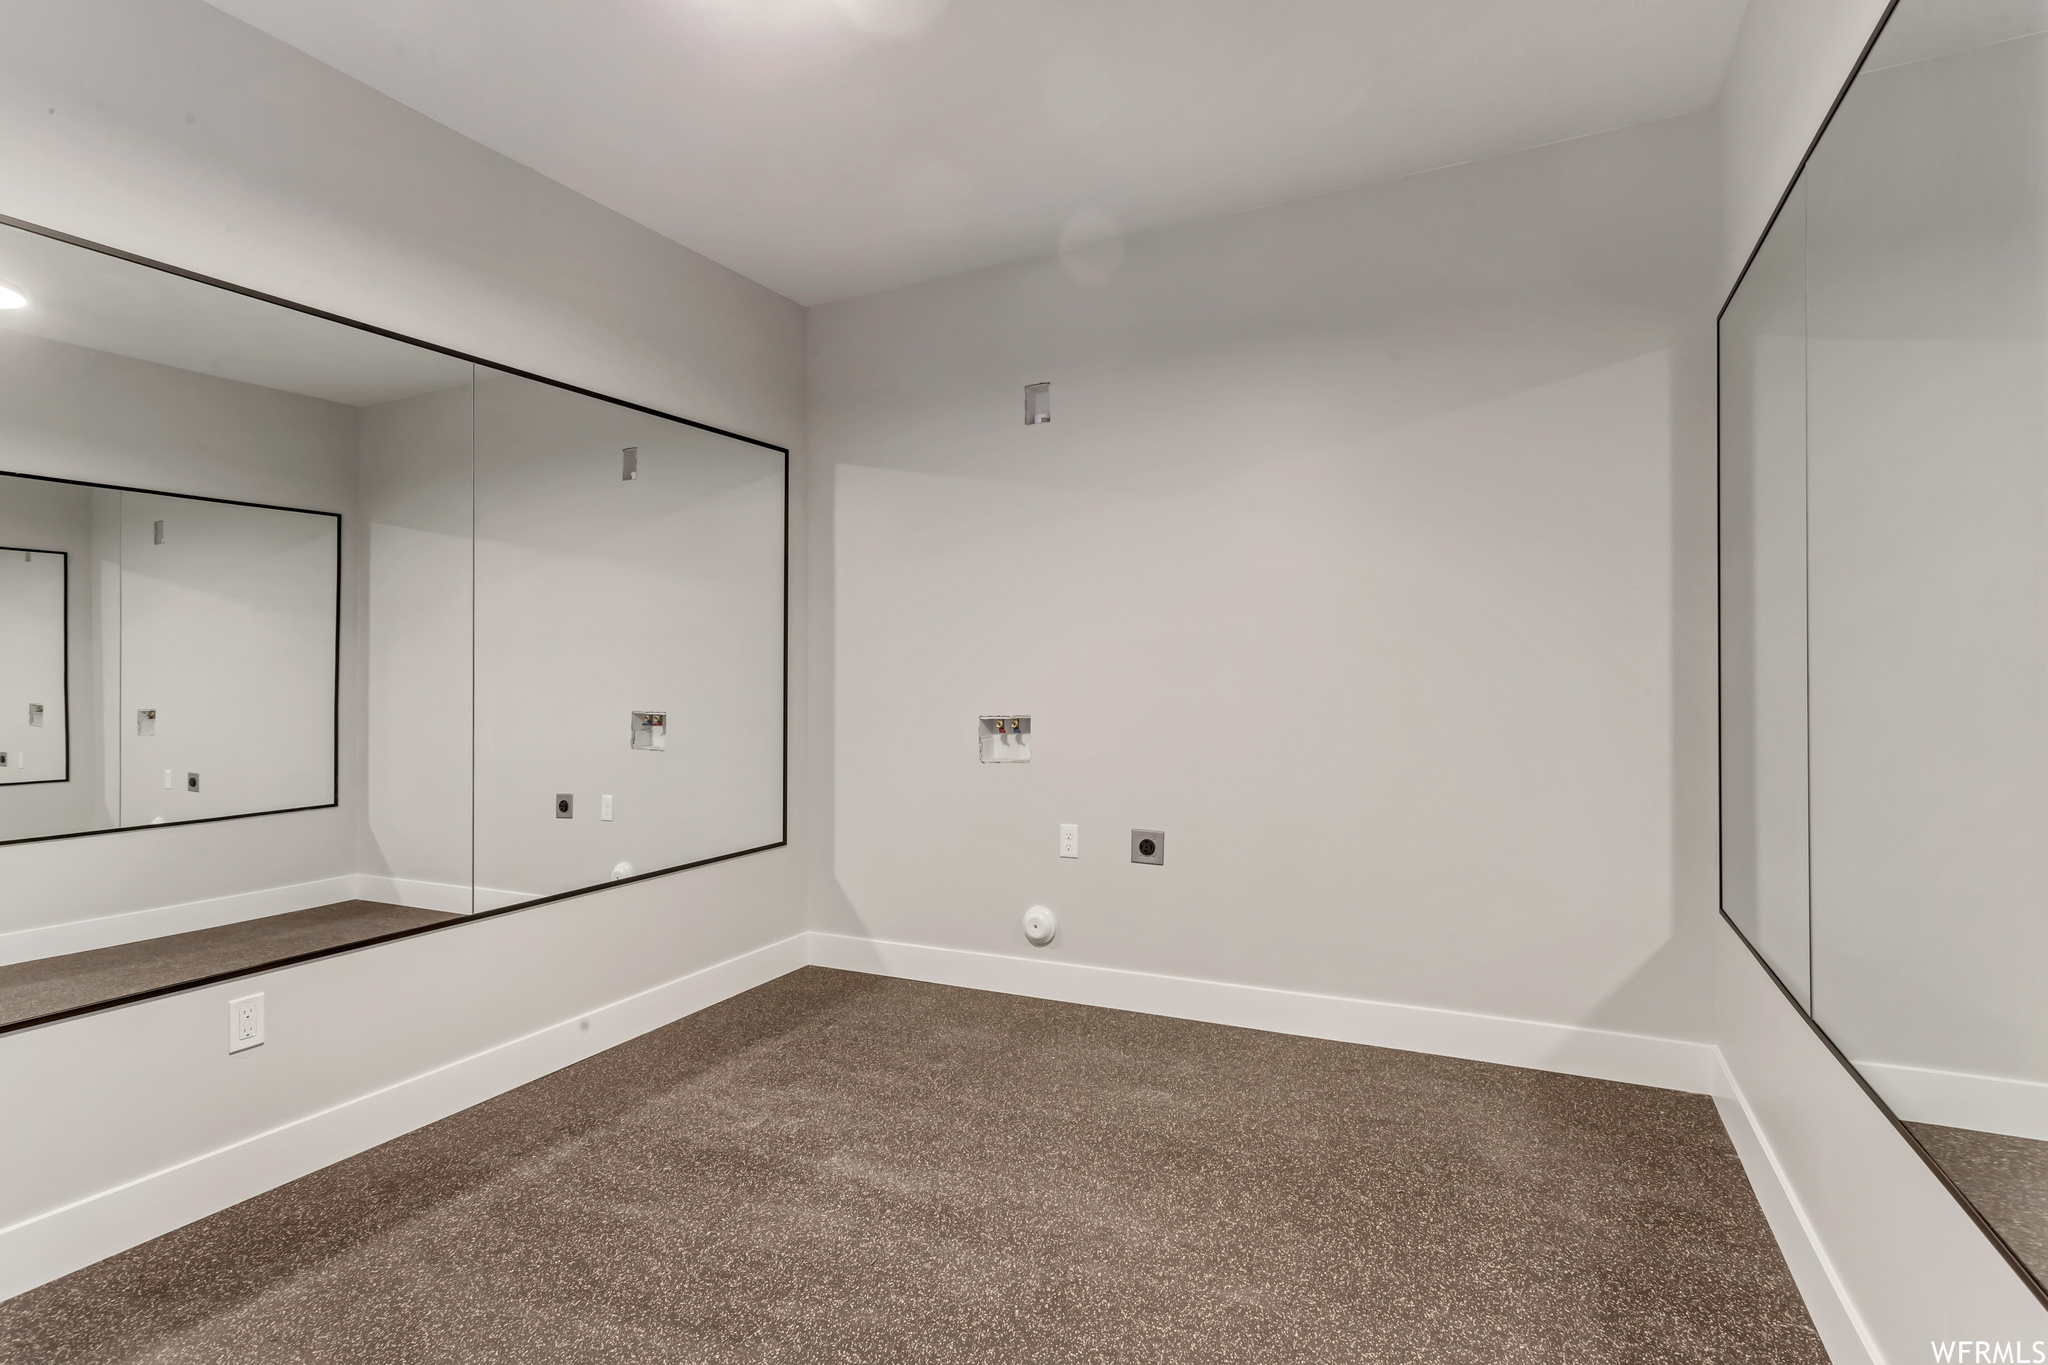 This owner chose gym flooring and mirrors for this room